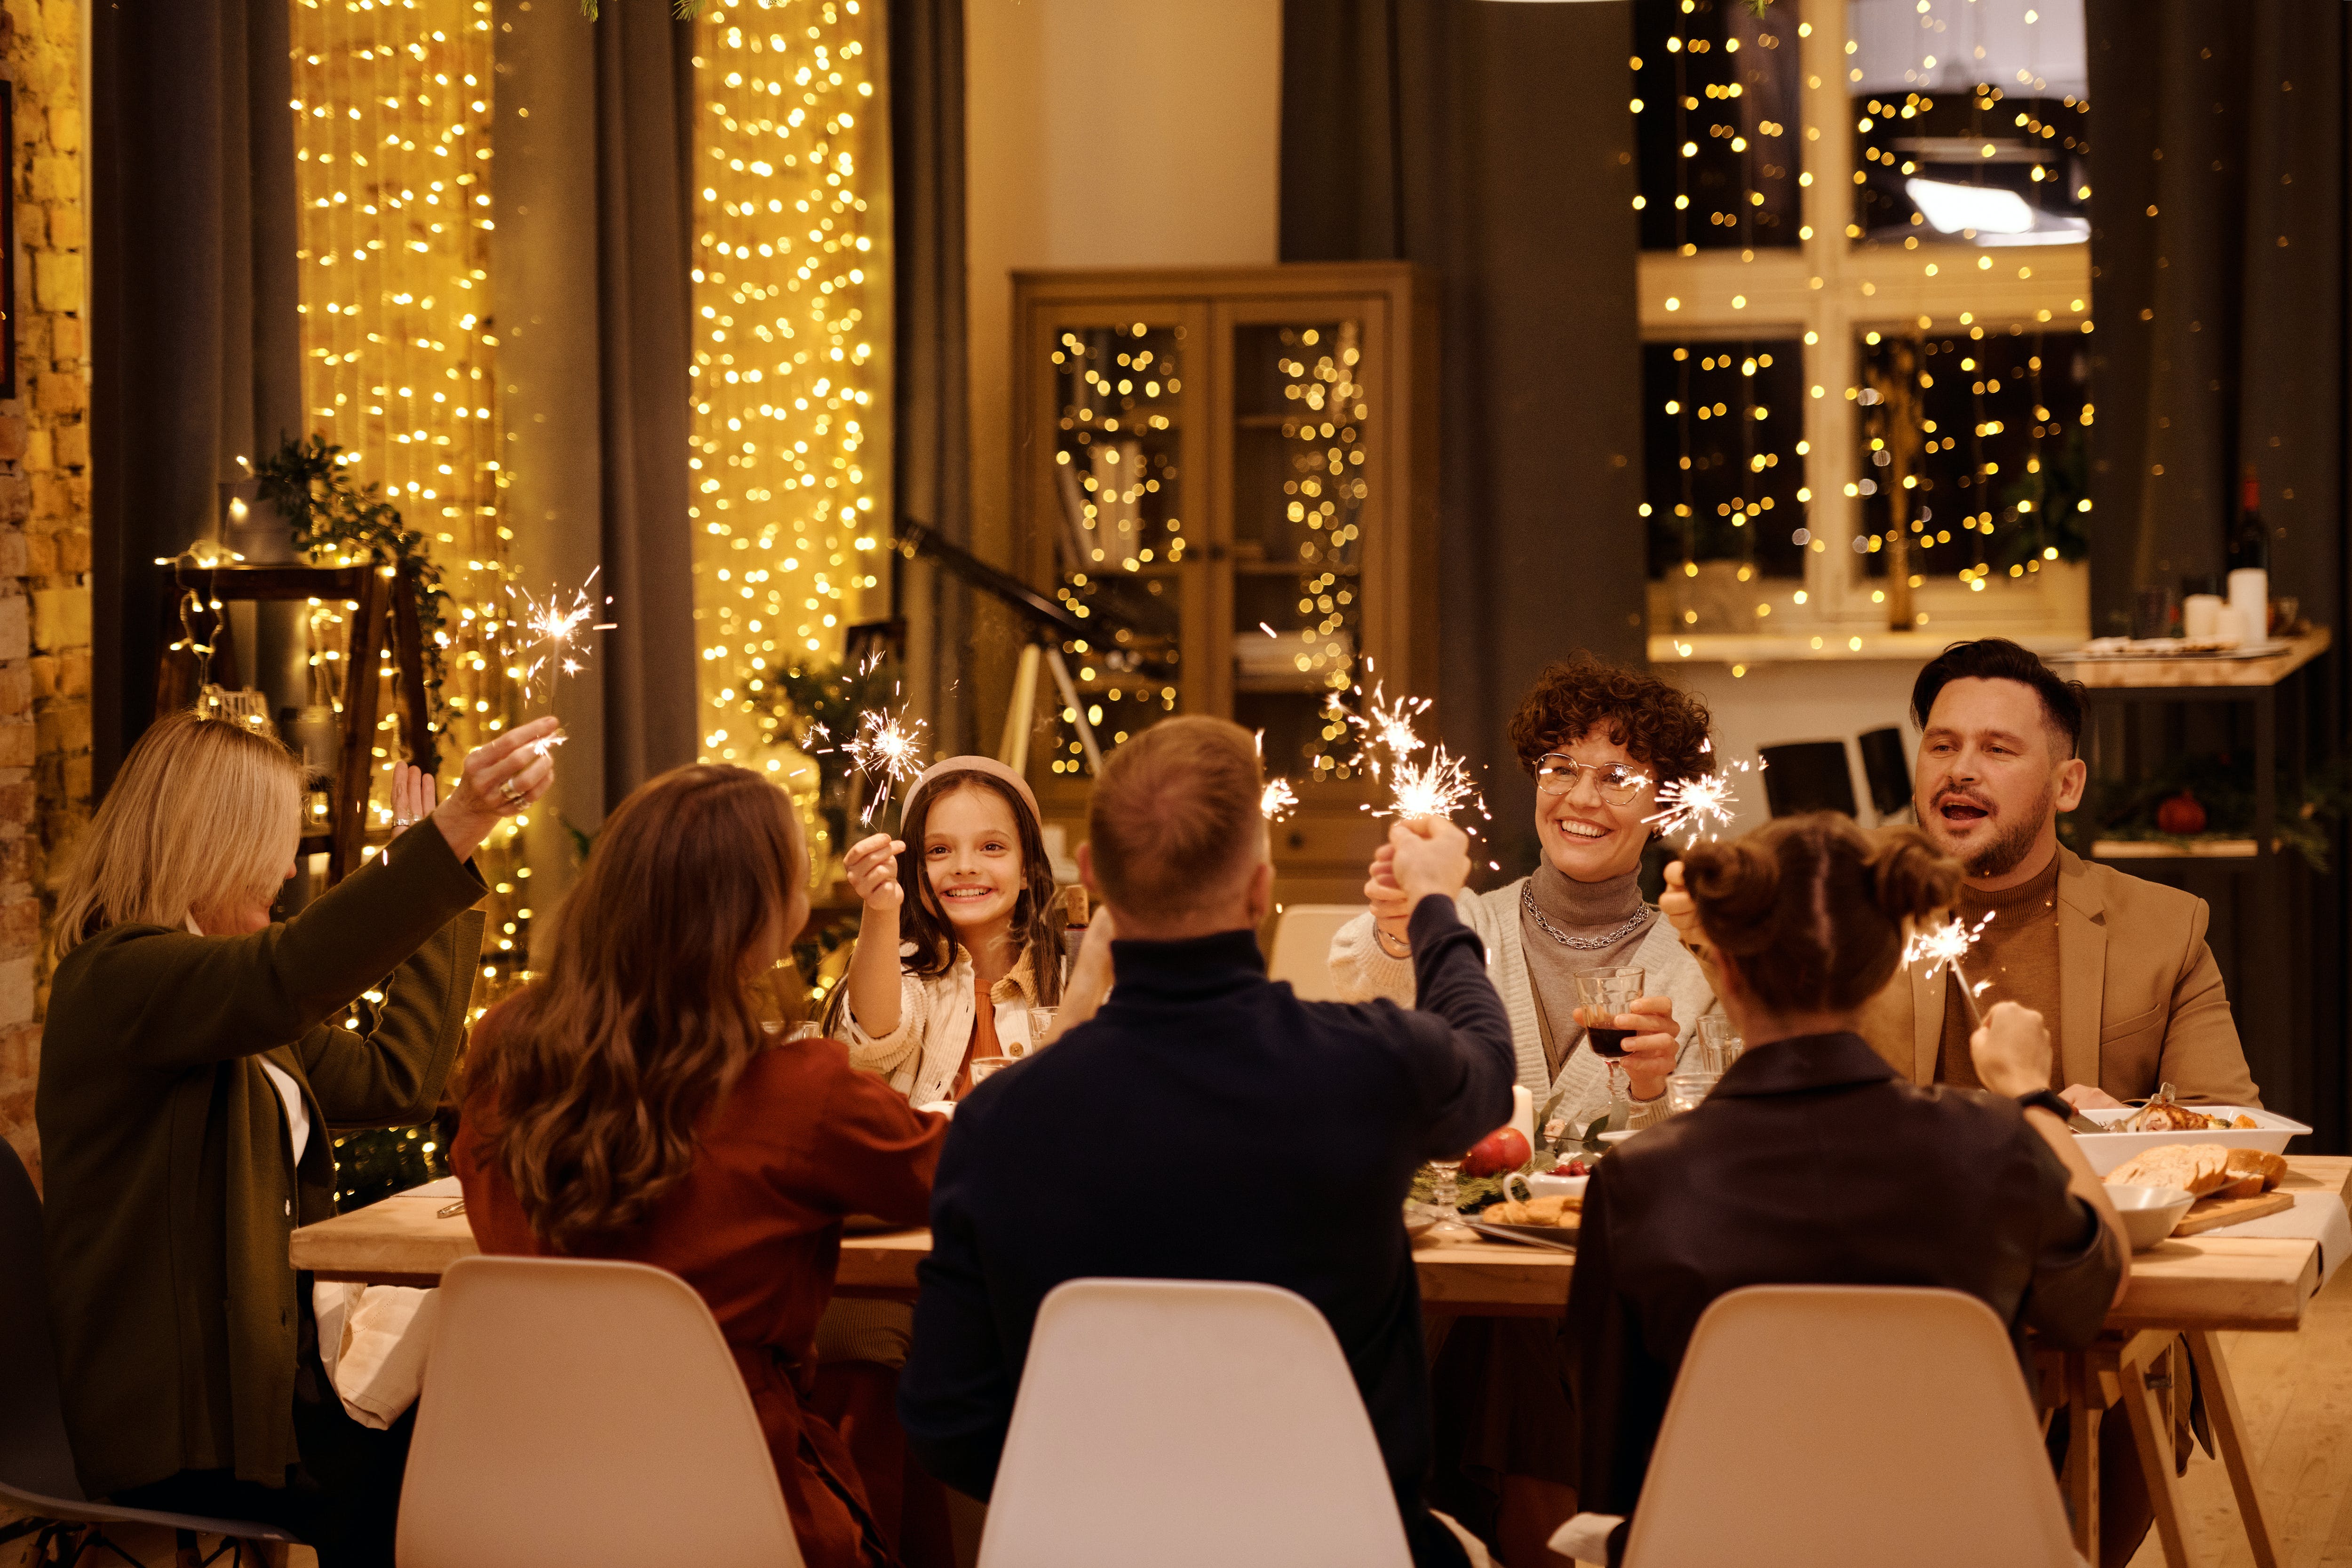 A family having Christmas dinner together | Source: Pexels